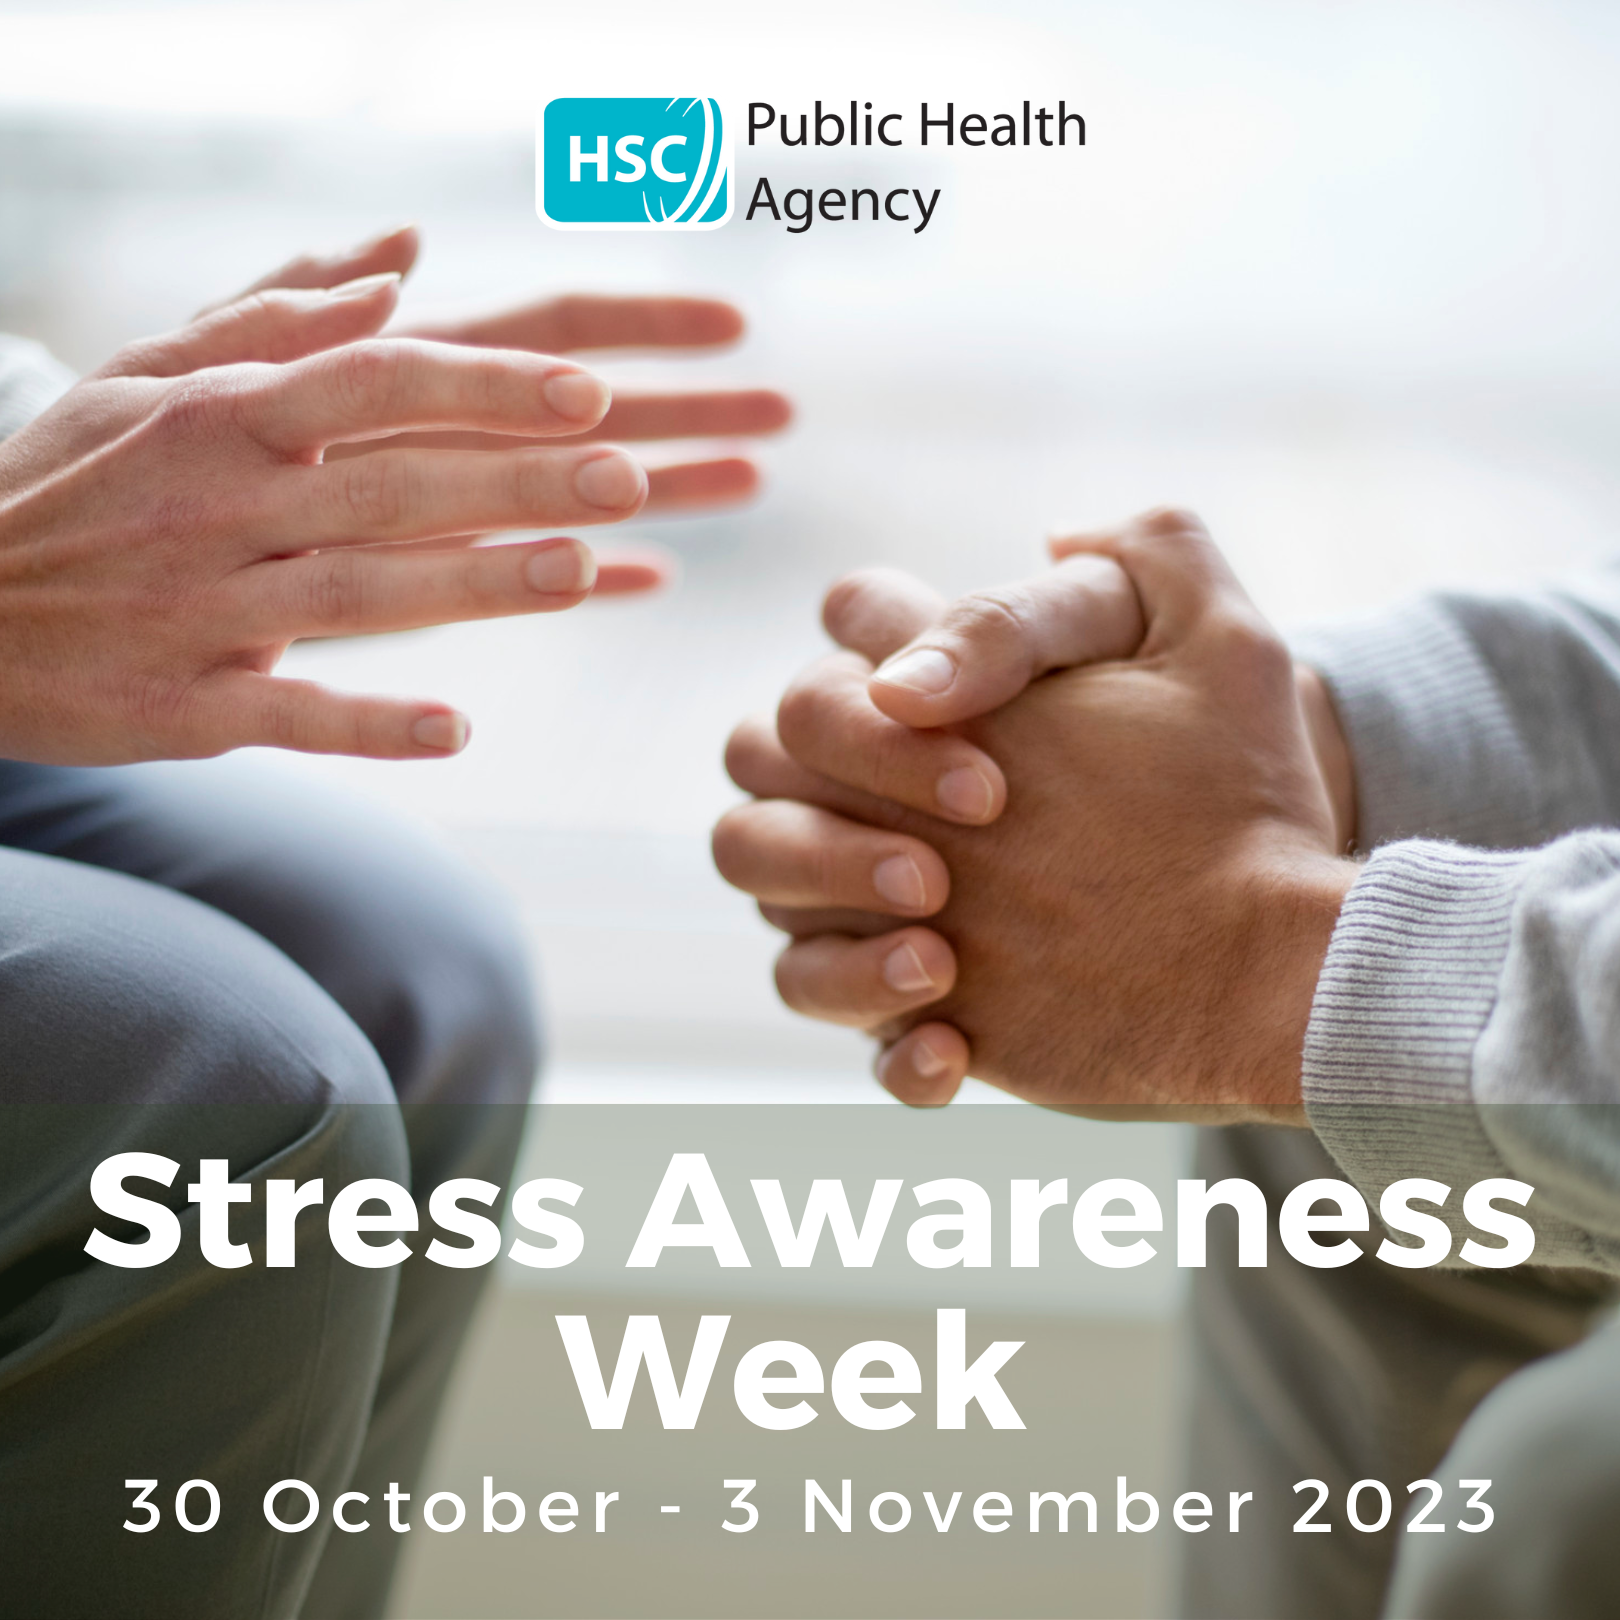 Image of two sets of hands and text that says "Stress Awareness Week"